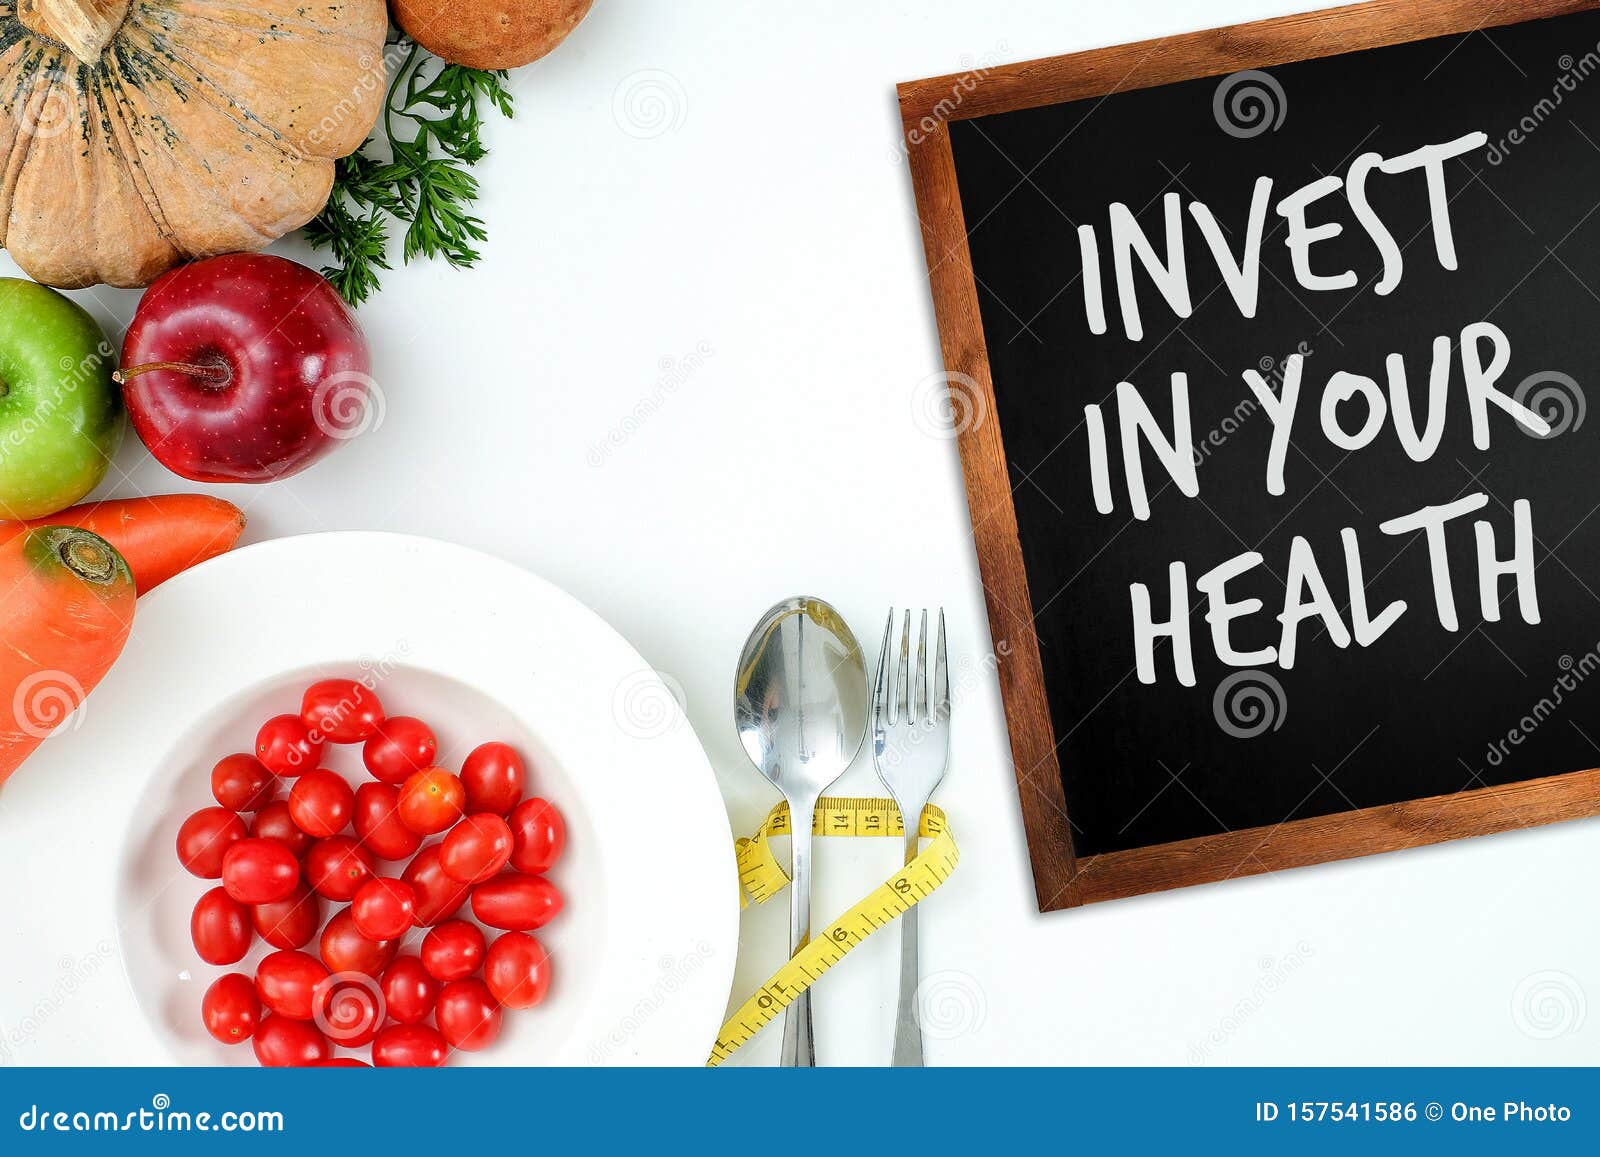 Invest In Your Health Healthy Lifestyle Concept With Diet And Fitness